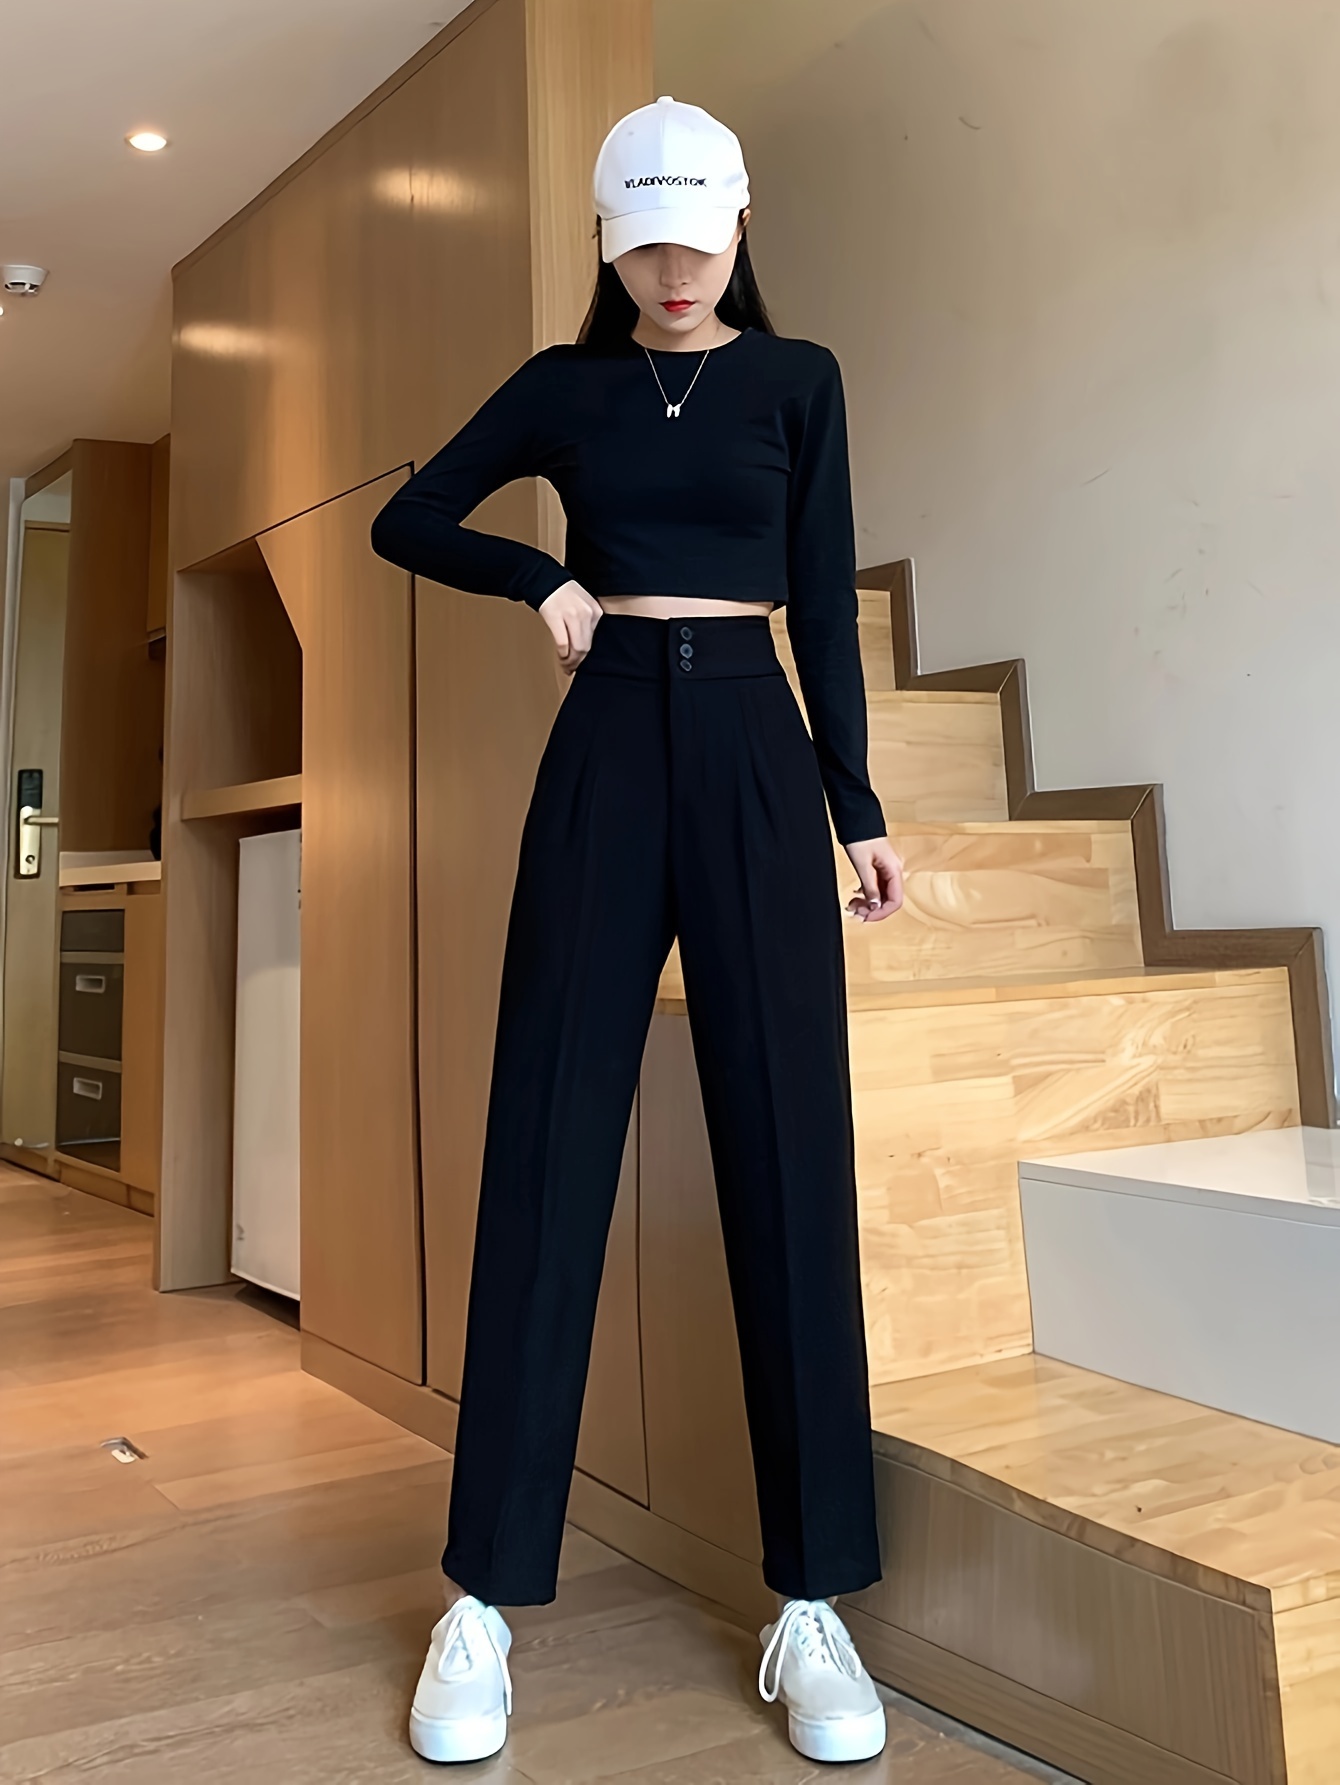 ShomPort Dress Pants for Women Business Casual Stretch Skinny Work Pants  Slim Pencil Pants with Pockets